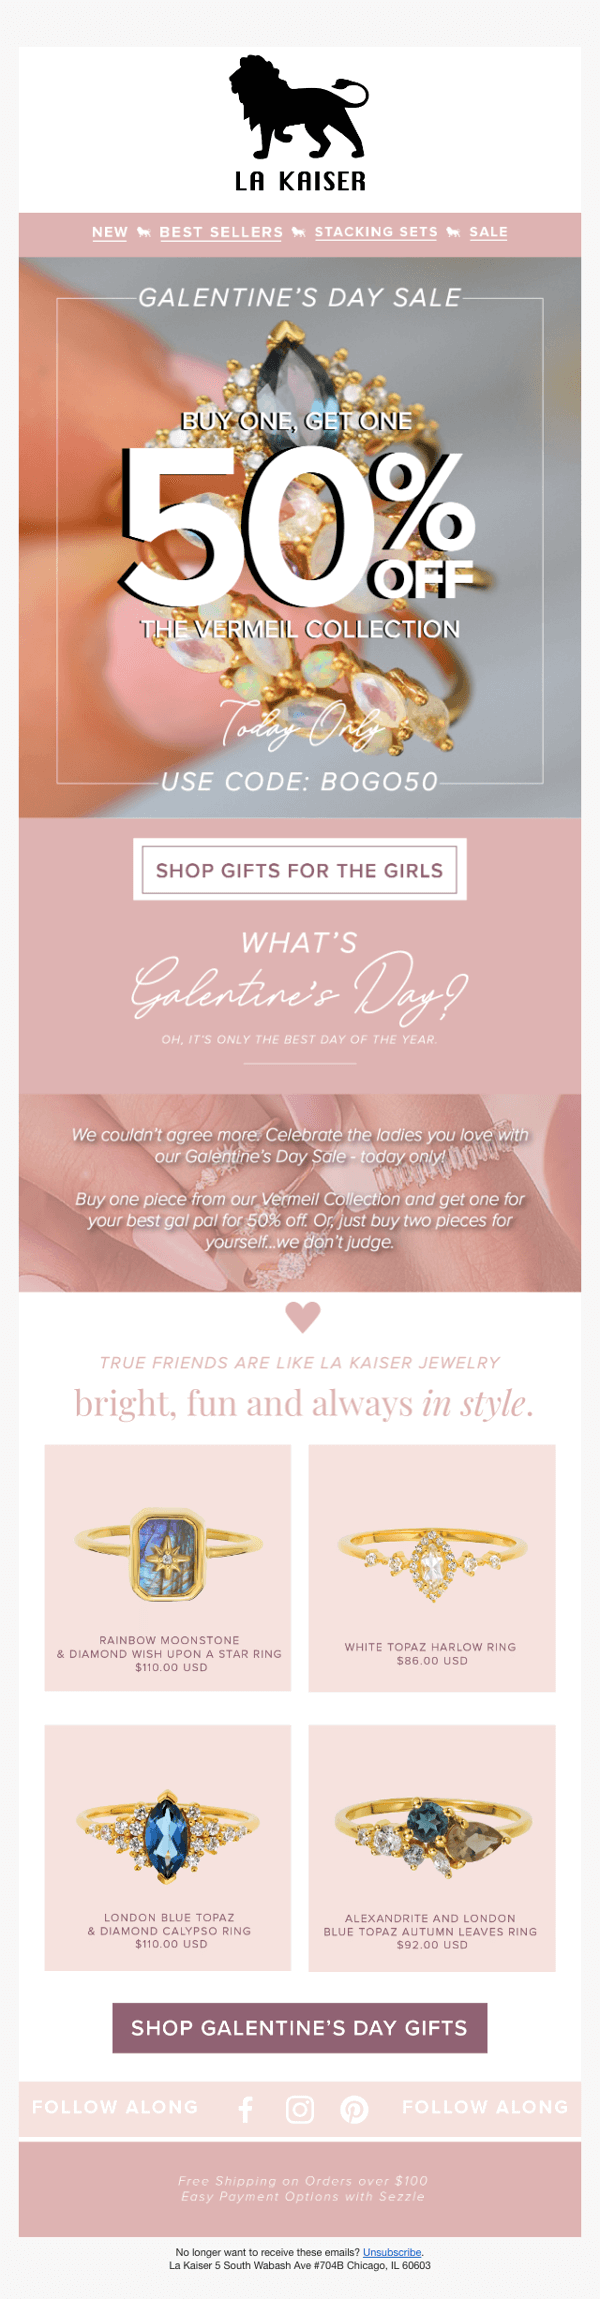 Image shows a Valentine’s Day email from La Kaiser